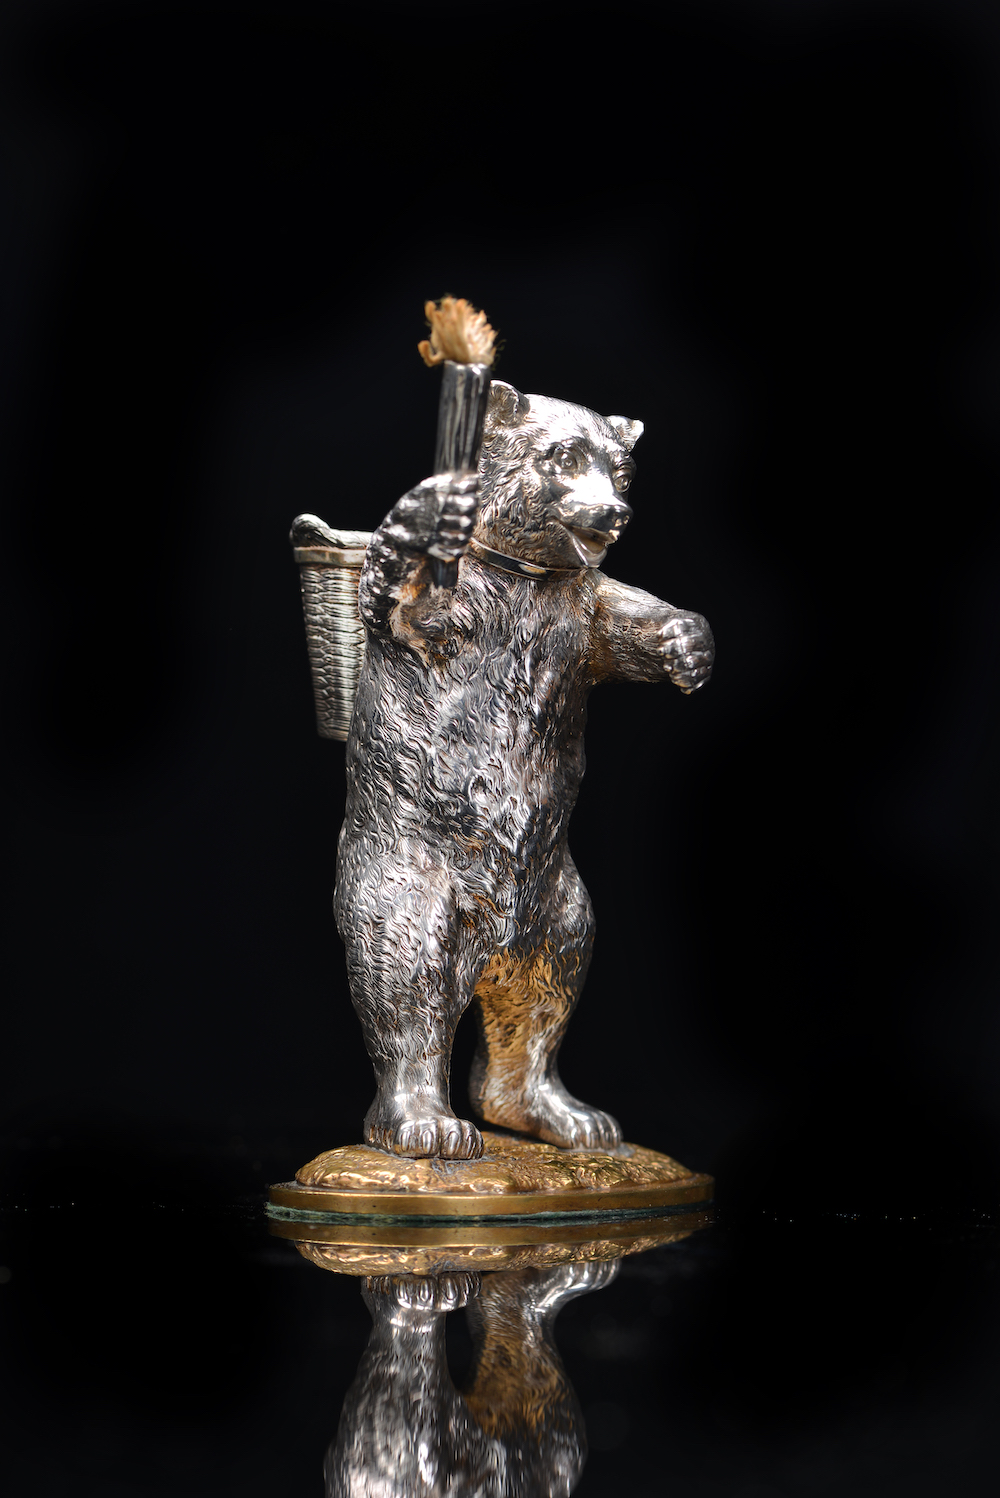 Victorian Novelty Hallmarked Silver Table Lighter Formed As A Bear, London 1876 Maker James Barclay Hennell, Height 14Cm. Sold For £3650